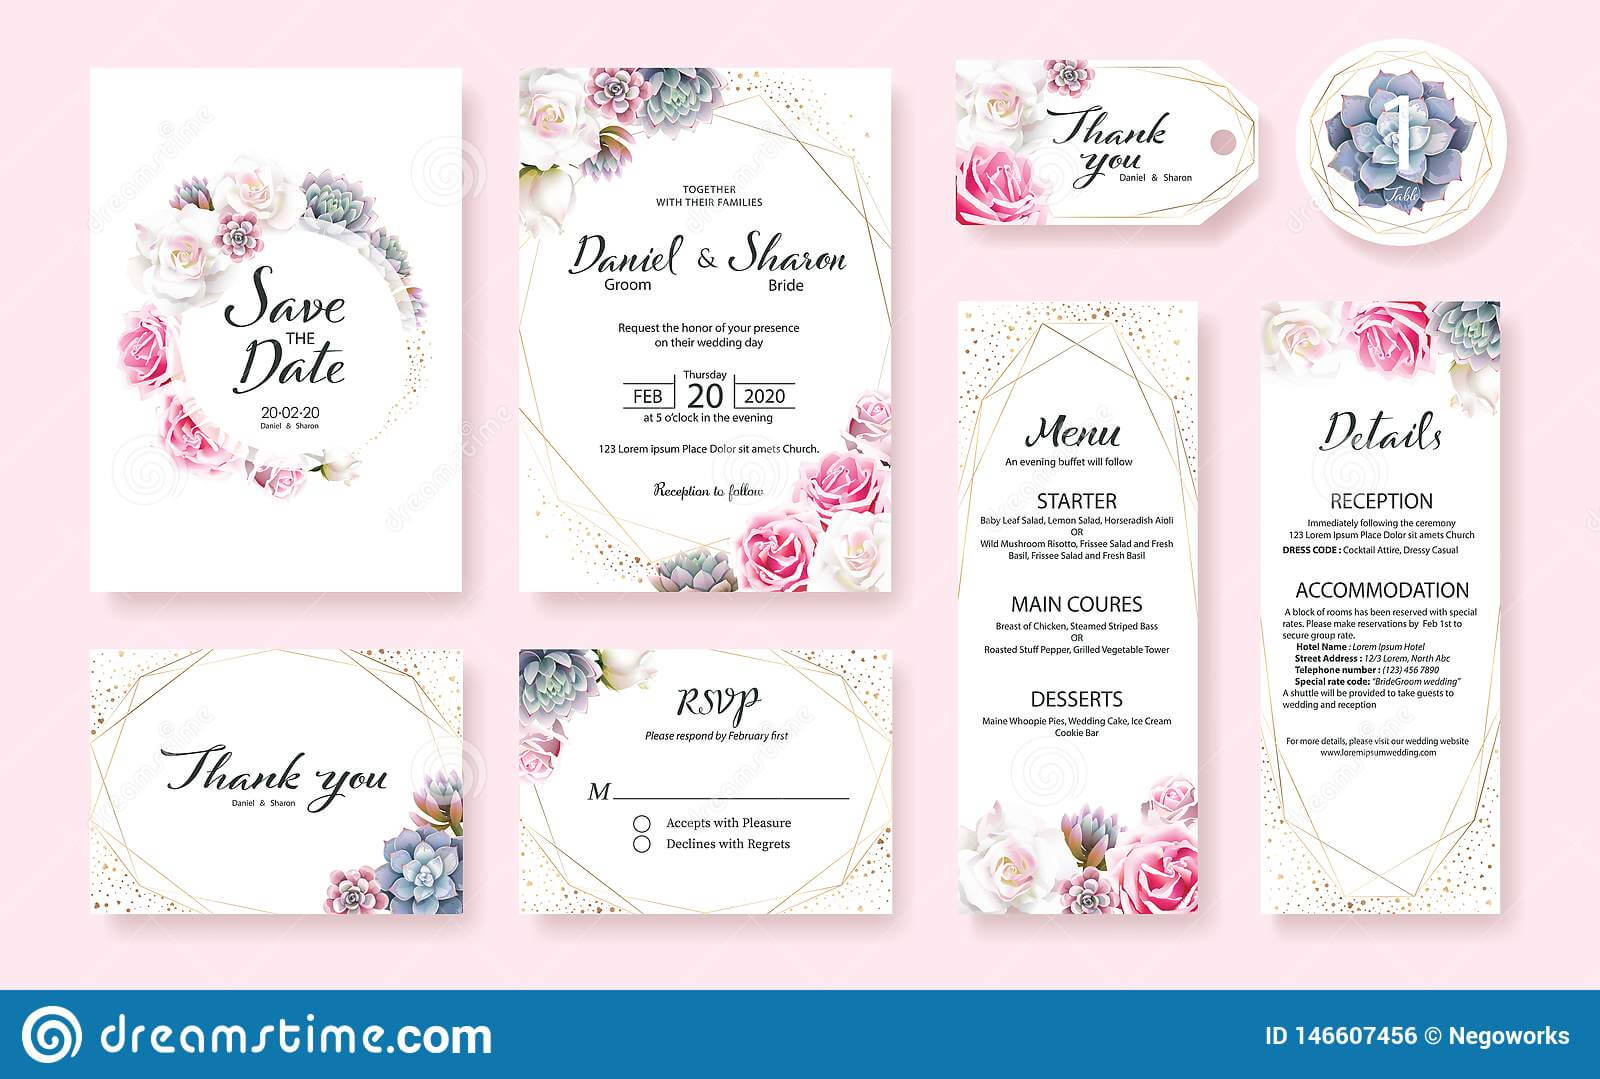 Floral Wedding Invitation Card, Save The Date, Thank You Intended For Table Reservation Card Template